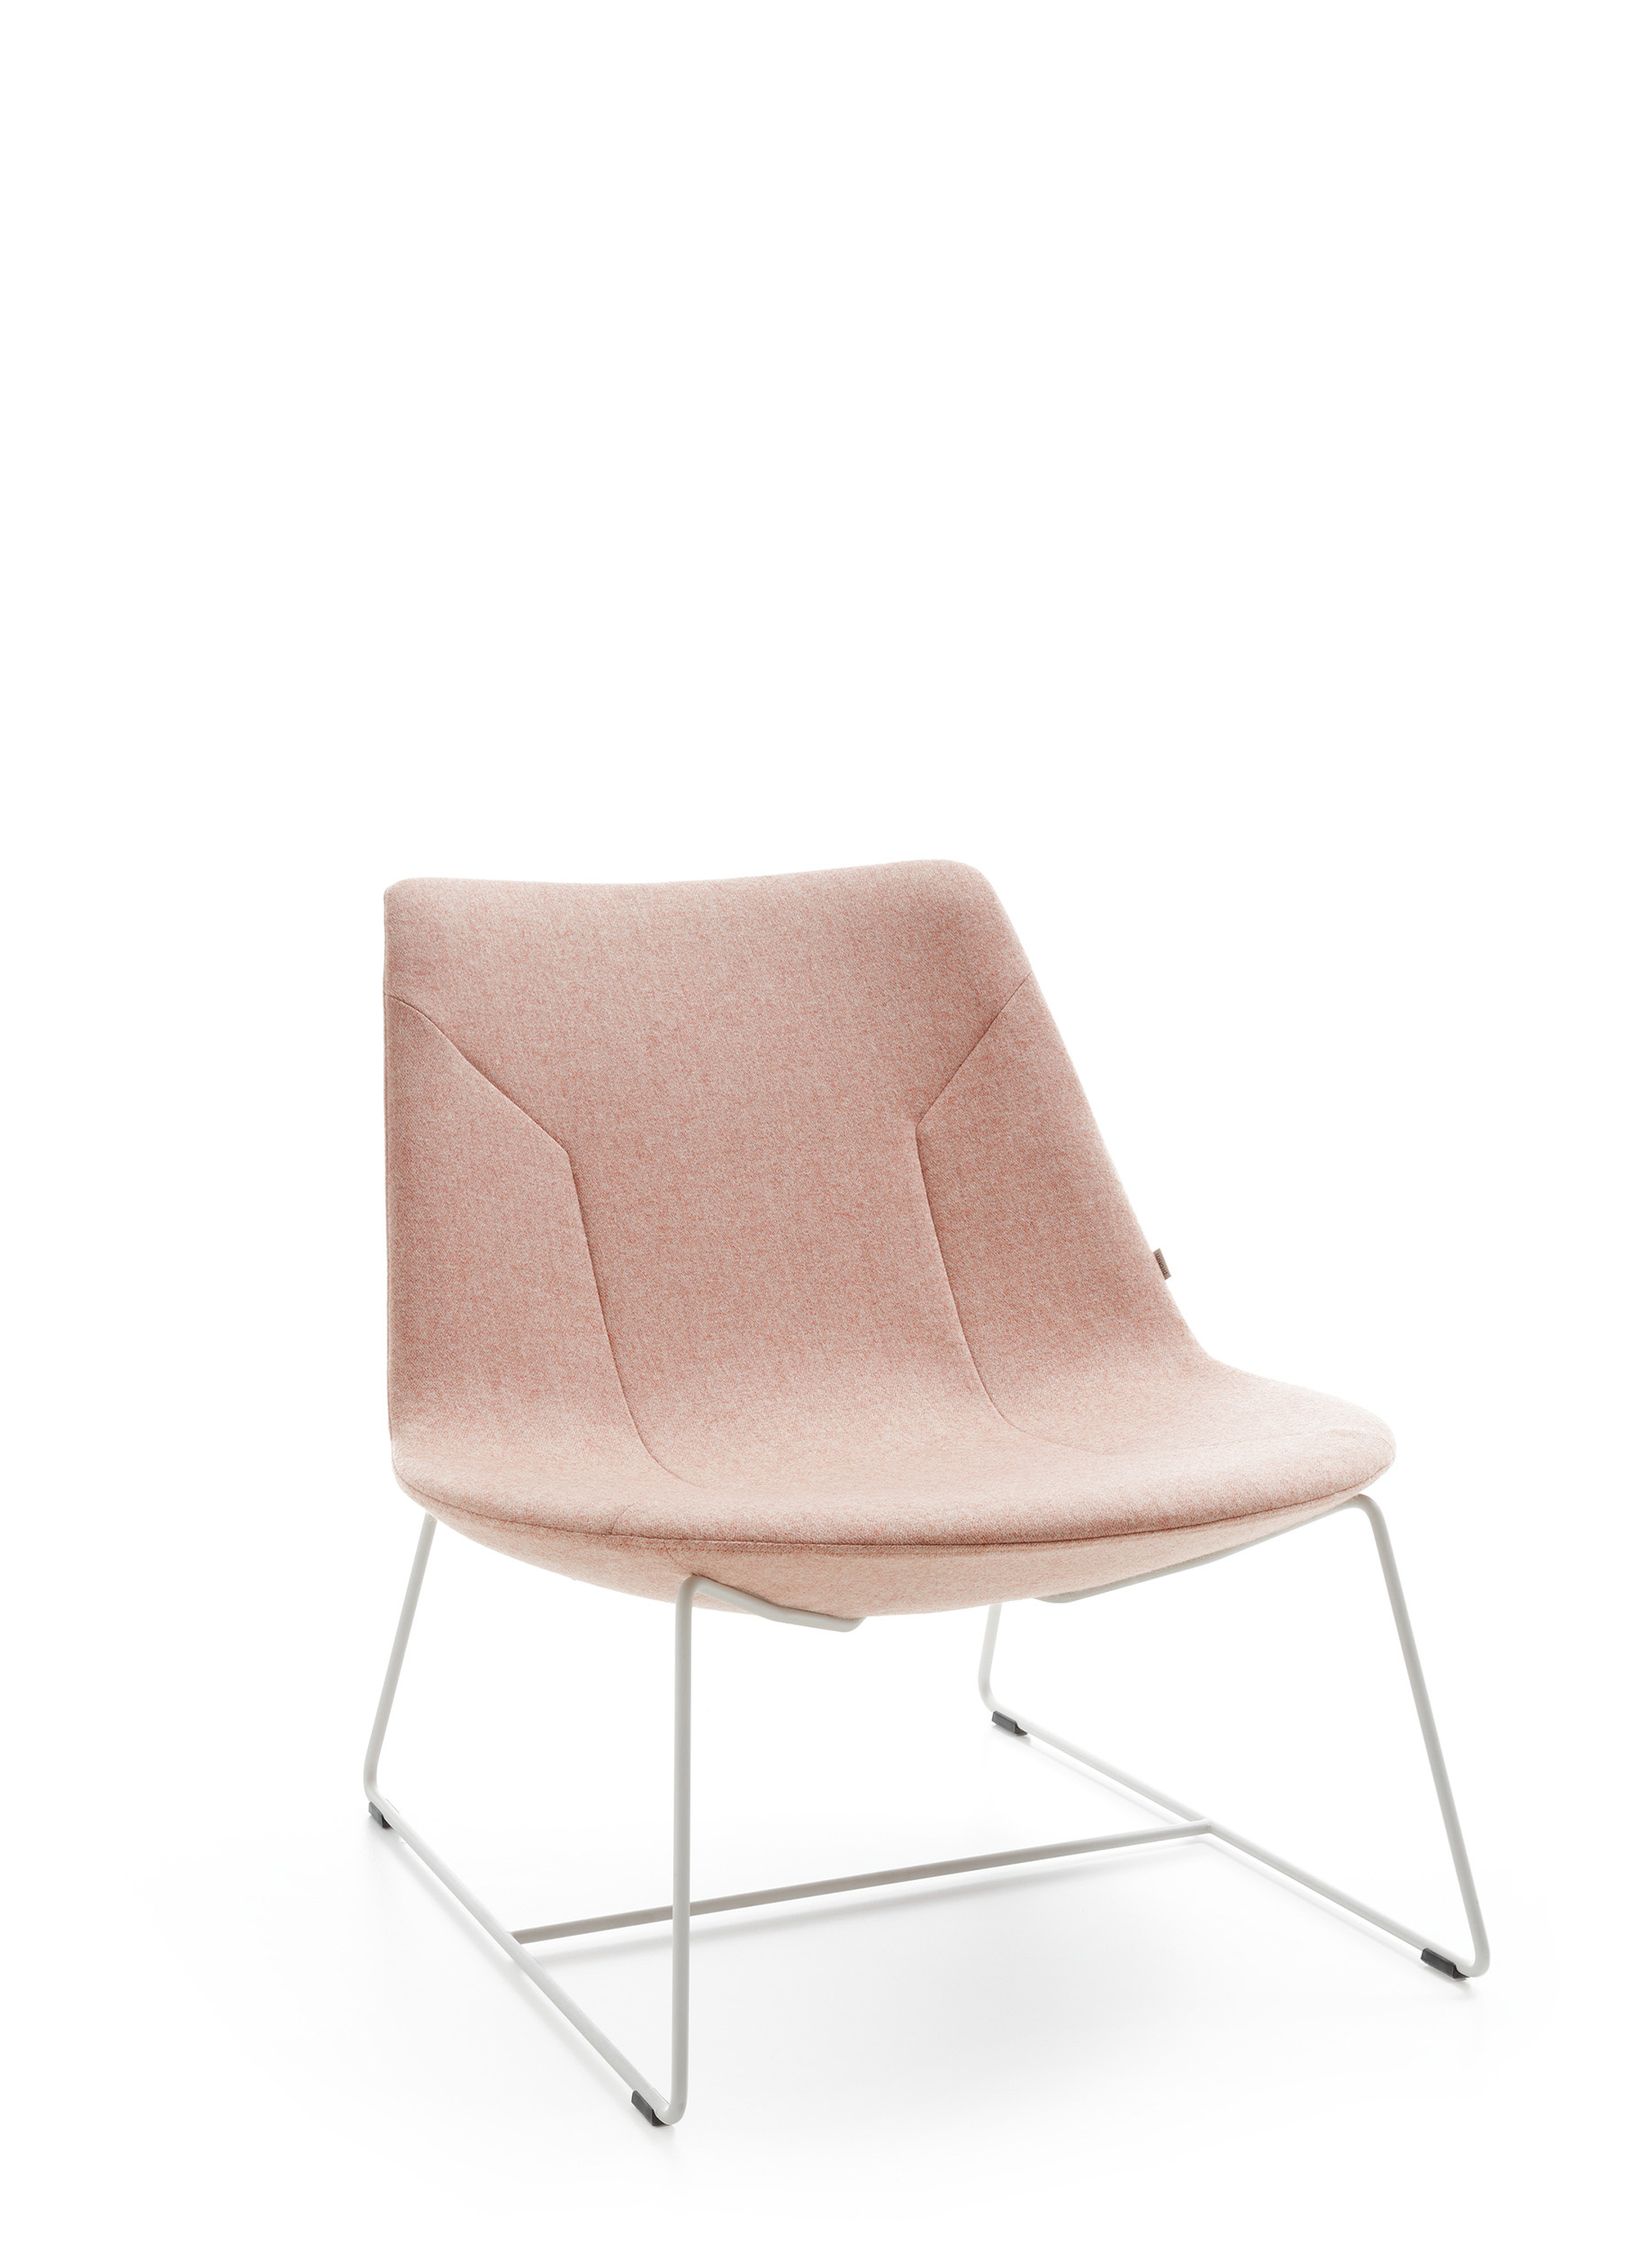 pink chic lounge soft chair with a low back and steel legs